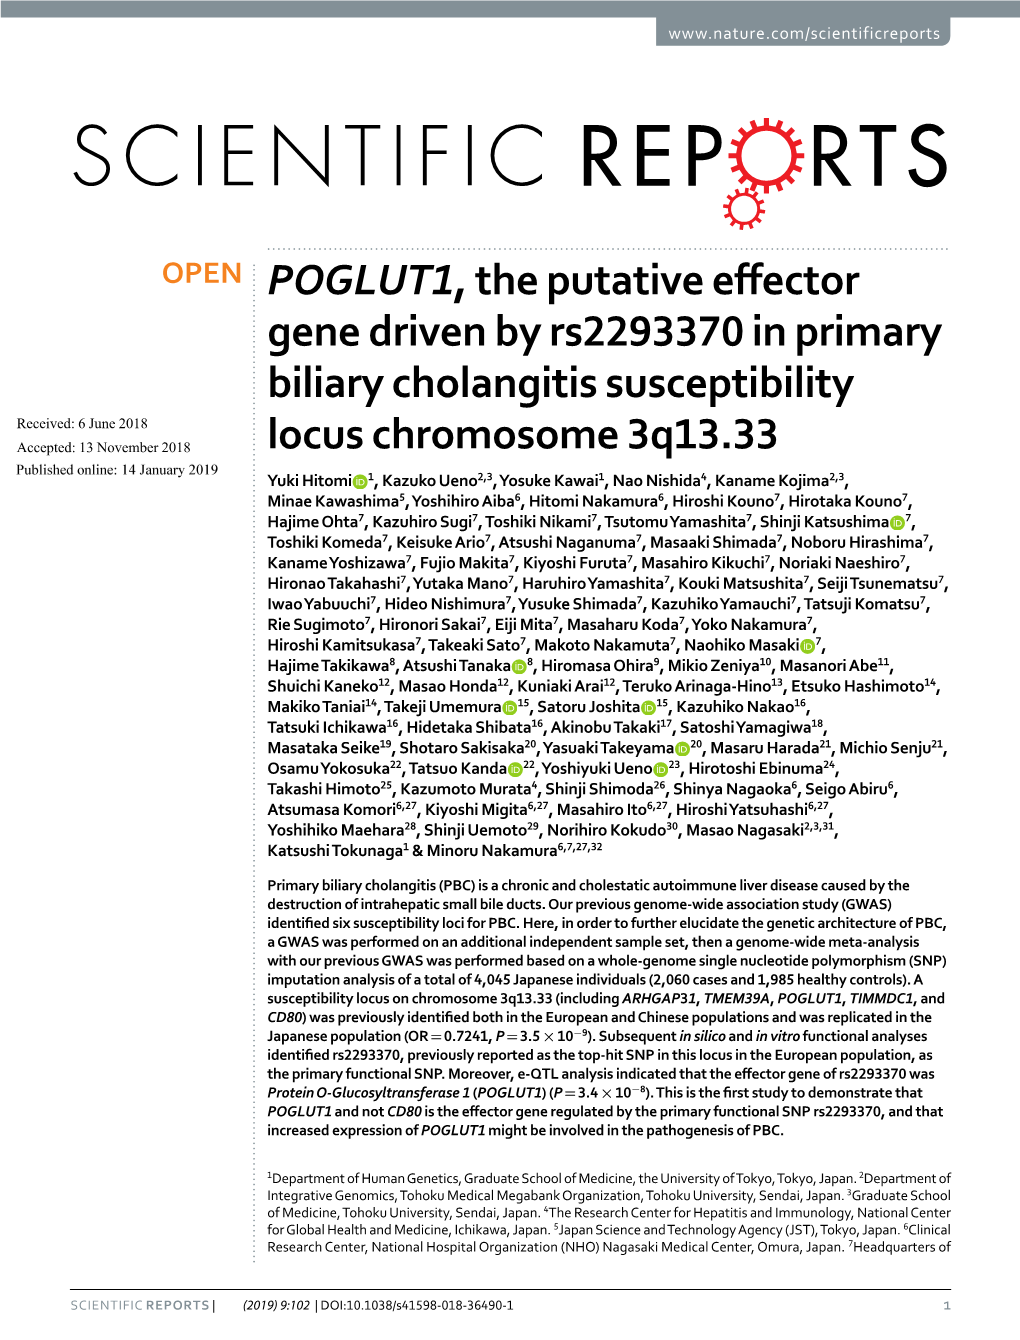 POGLUT1, the Putative Effector Gene Driven by Rs2293370 in Primary